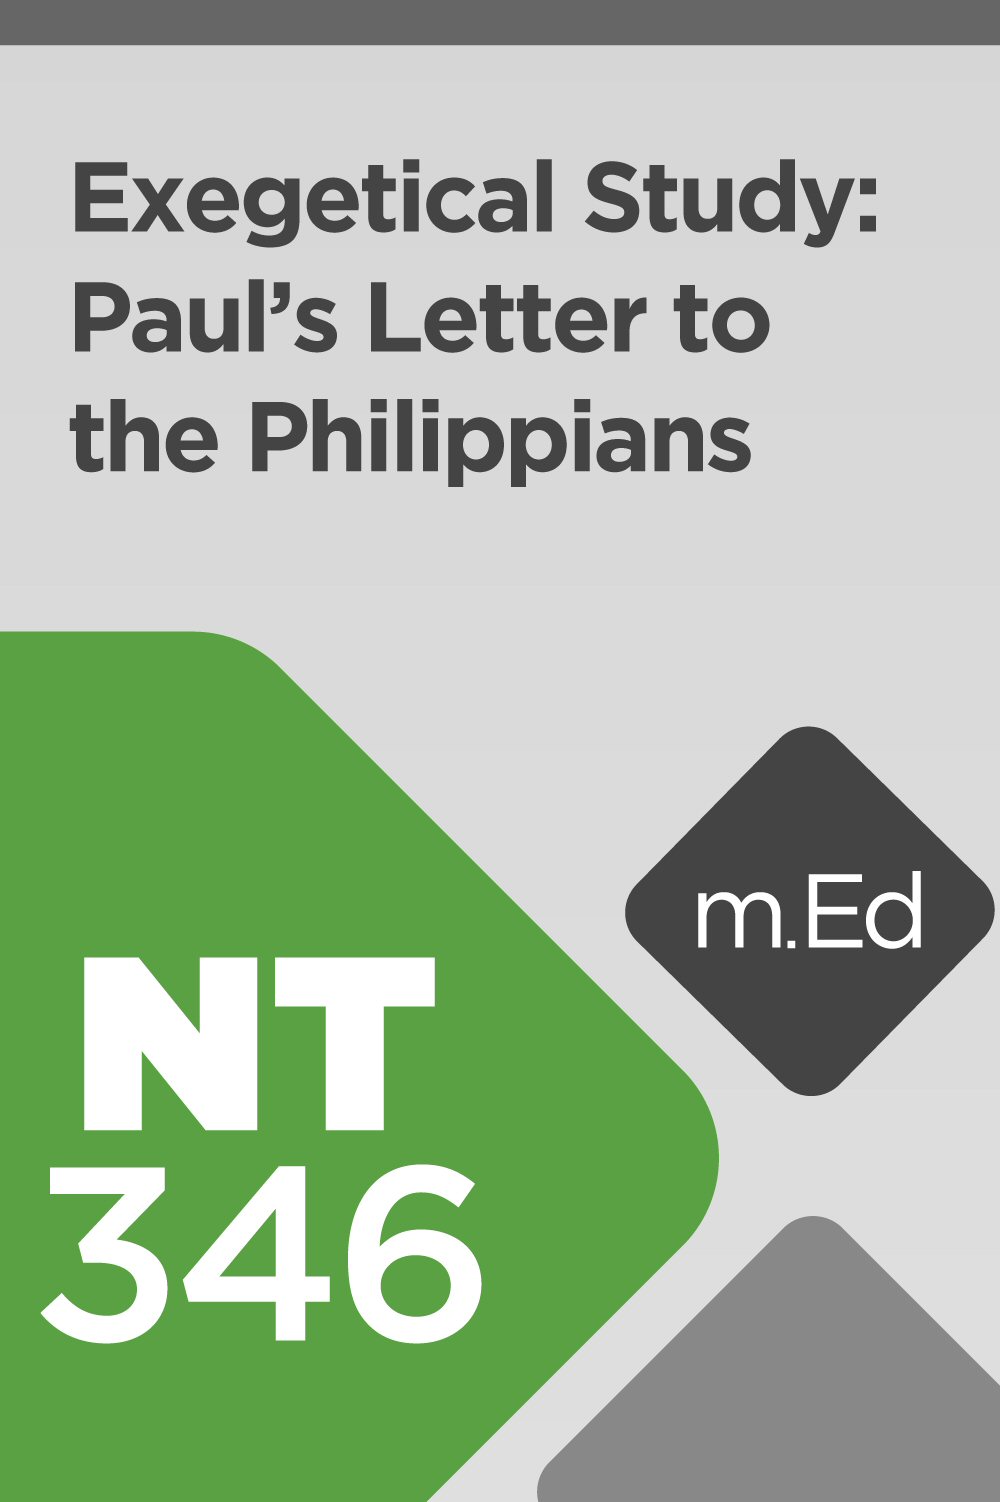 Mobile Ed: NT346 Exegetical Study: Paul’s Letter to the Philippians (8 hour course)